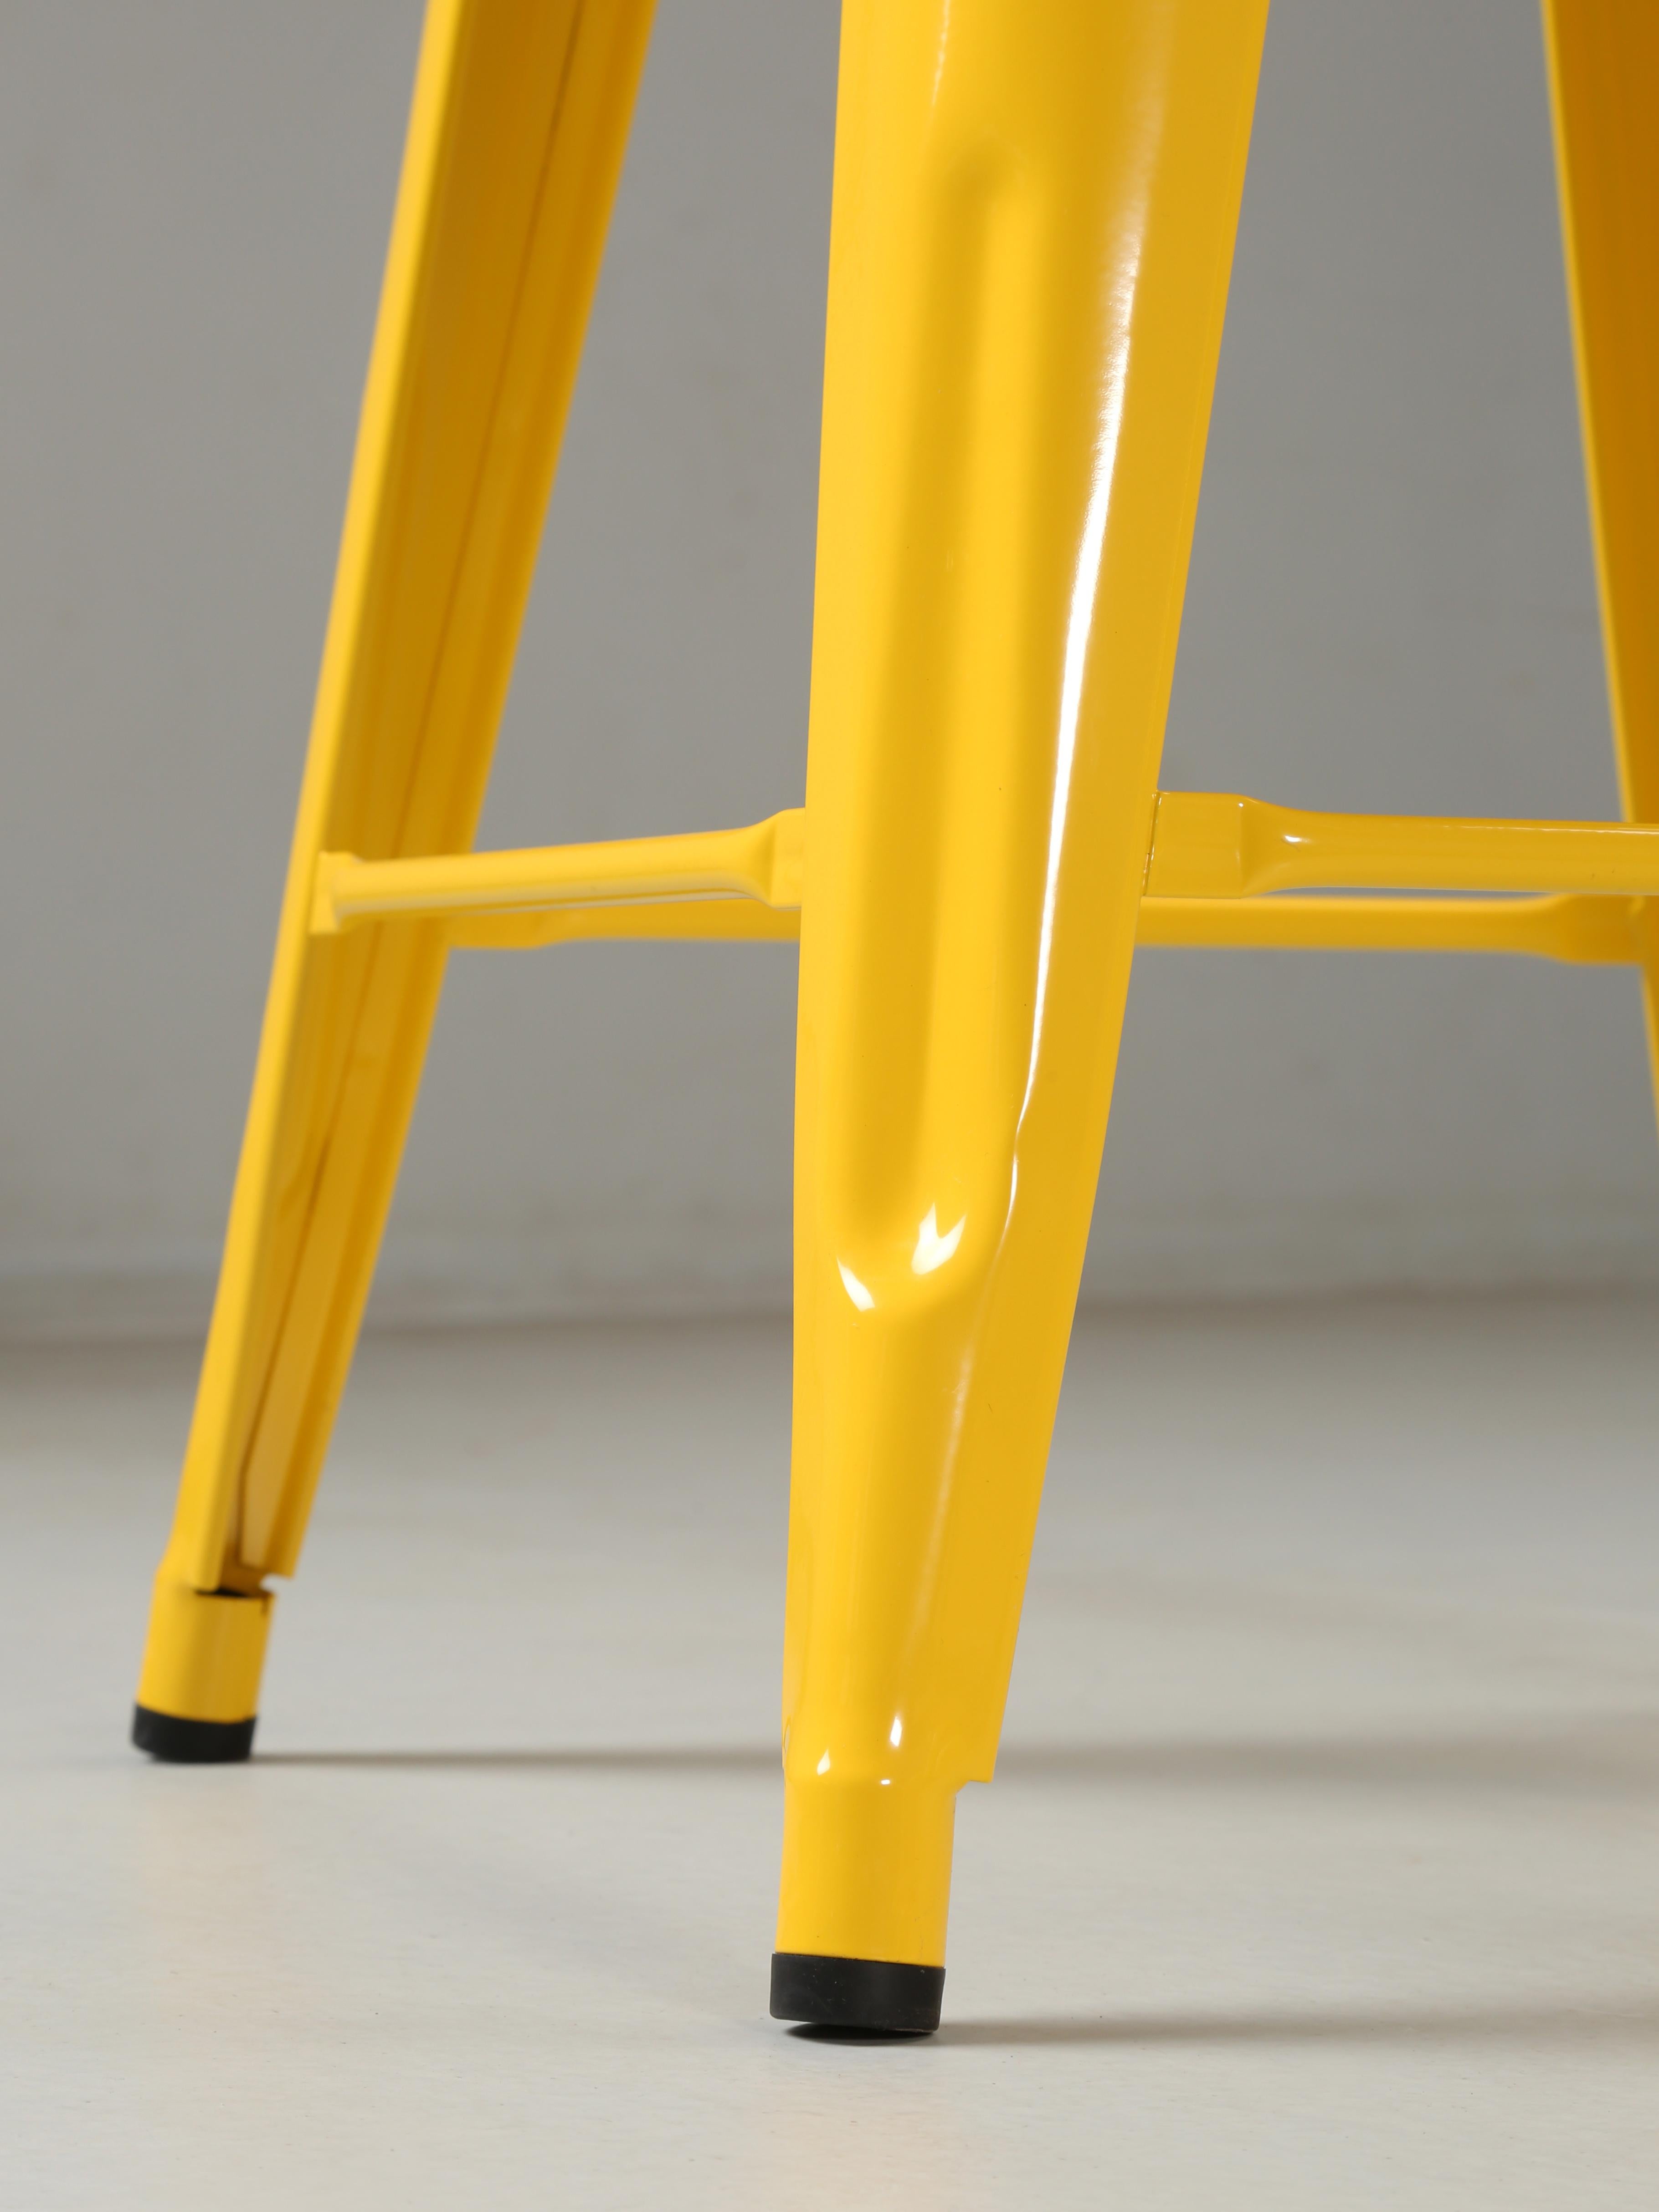 Hand-Crafted Tolix Made in France Steel Stacking Stools 100's in Stock, Most Colors Available For Sale